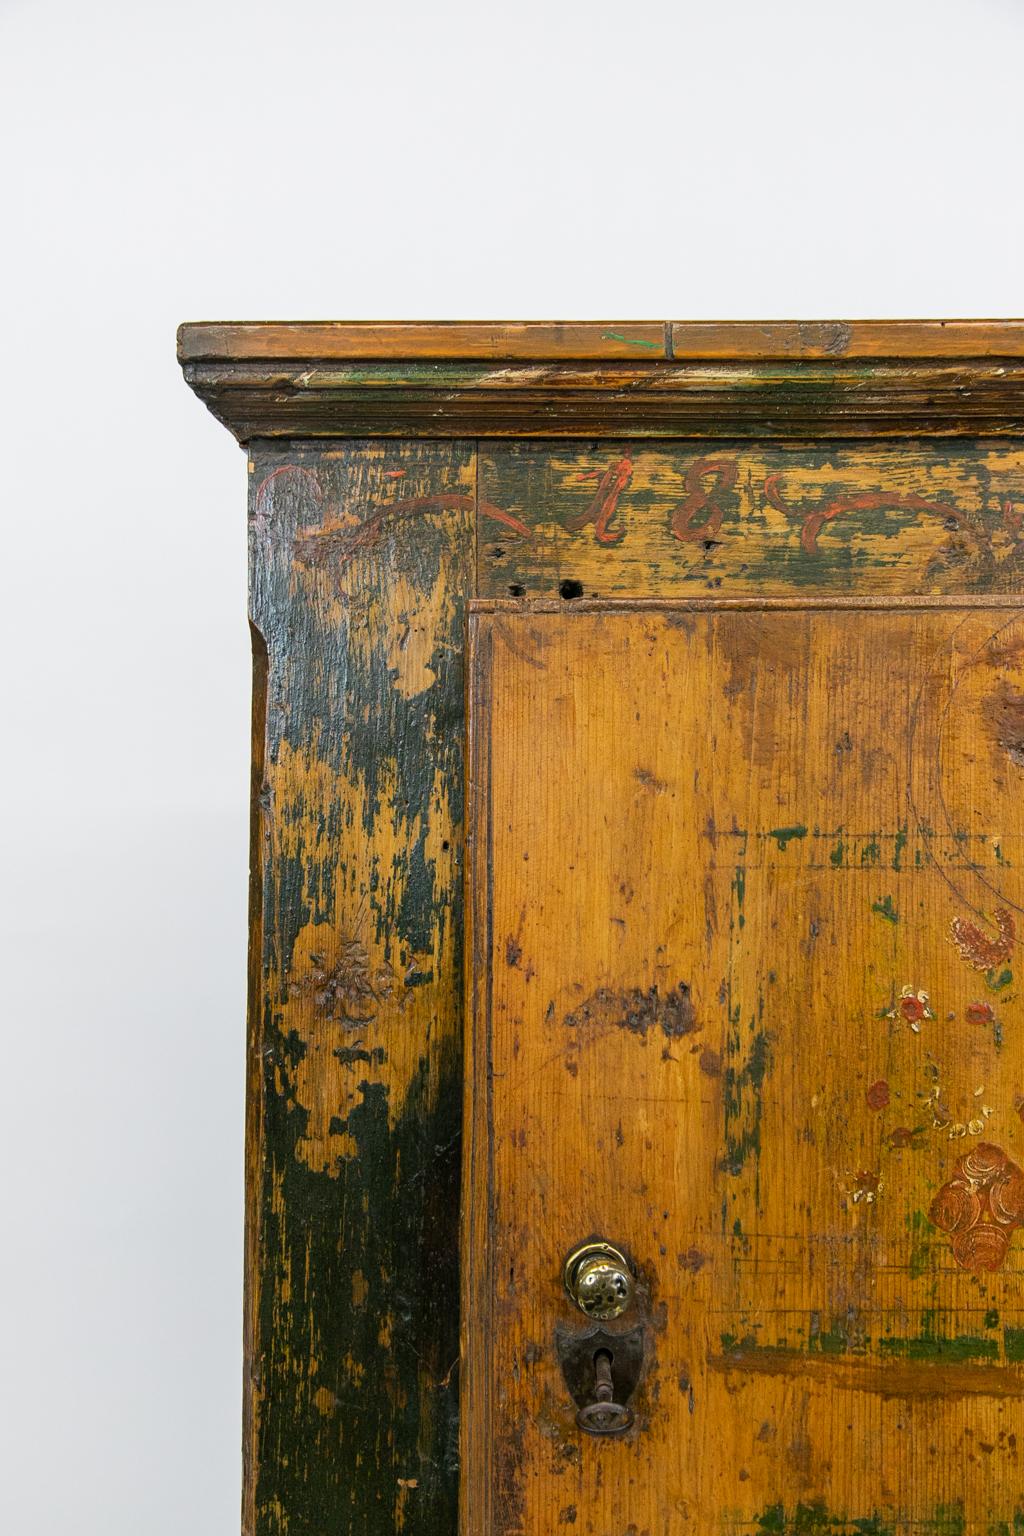 Painted Central European food cupboard has the original working lock and key, original heavy steel hinges, and the original floral painting. There are exposed dovetails on the top and chamfered corners on the front. The base has a scalloped apron.